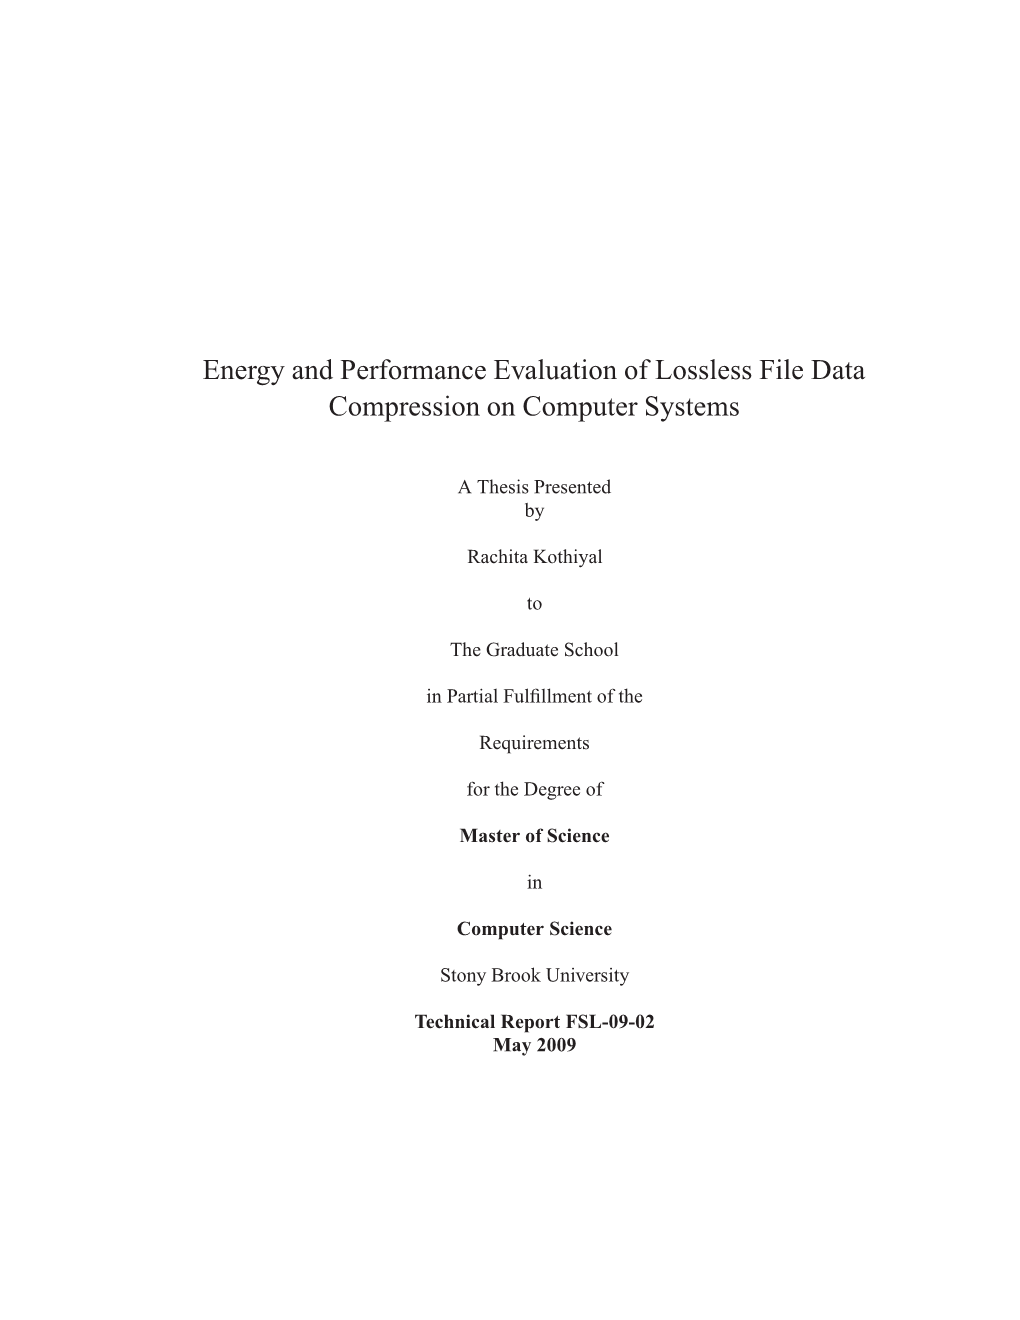 Energy and Performance Evaluation of Lossless File Data Compression on Computer Systems